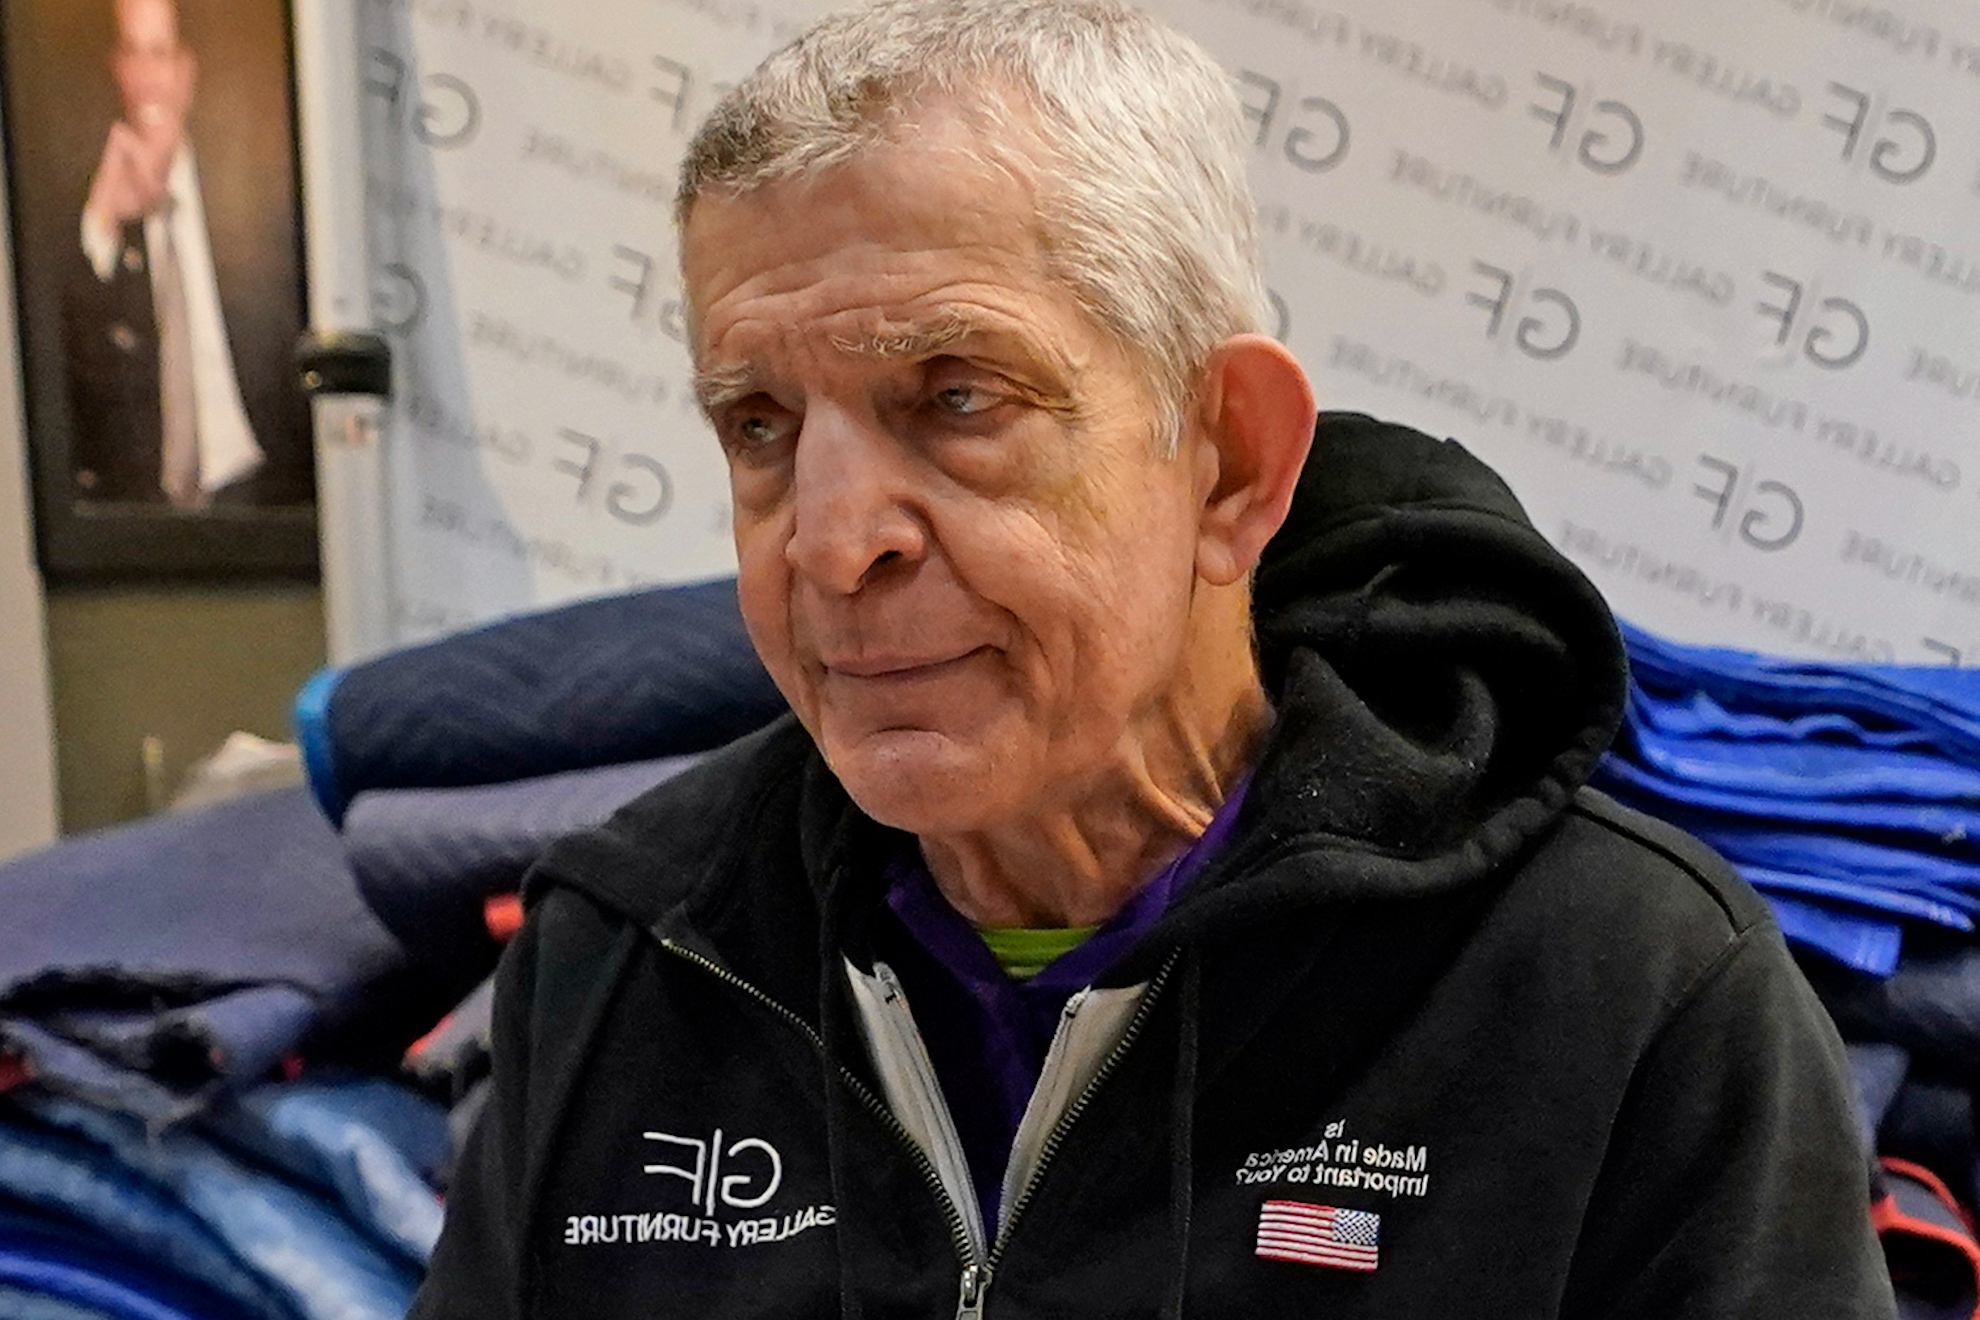 Jim IcIngvale, also known as Mattress Mack